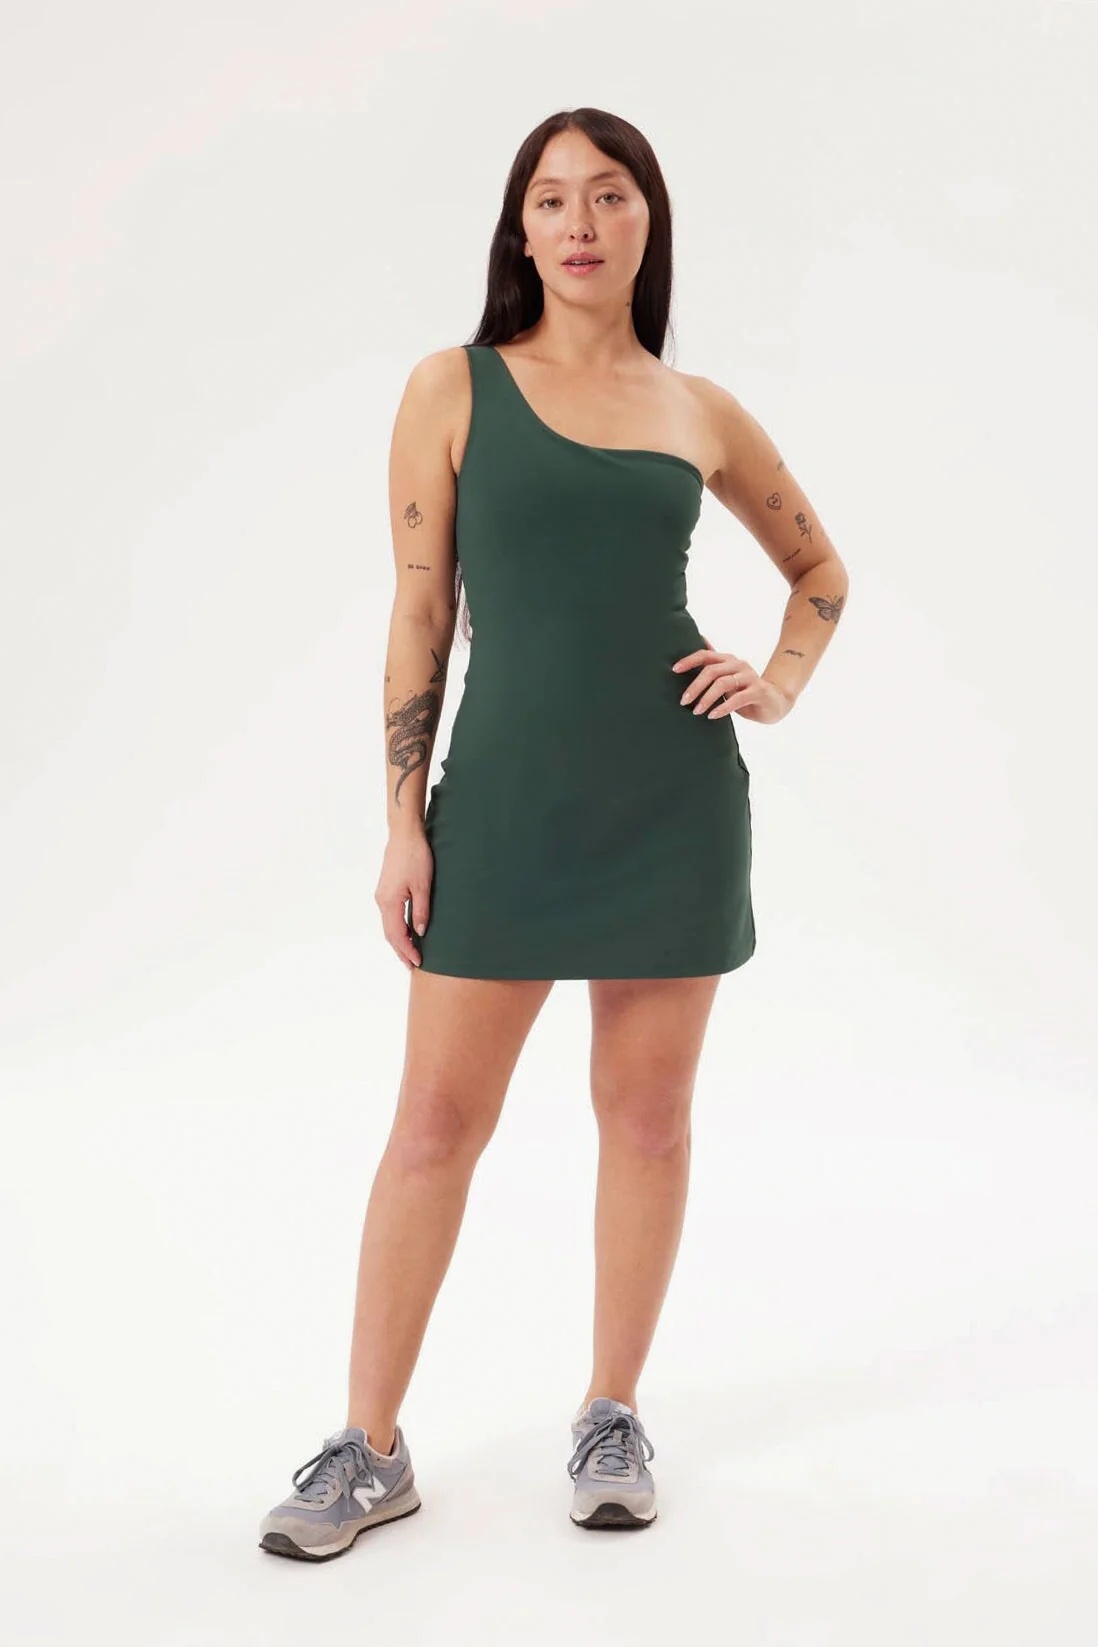 A model in a one shouldered workout dress in green.